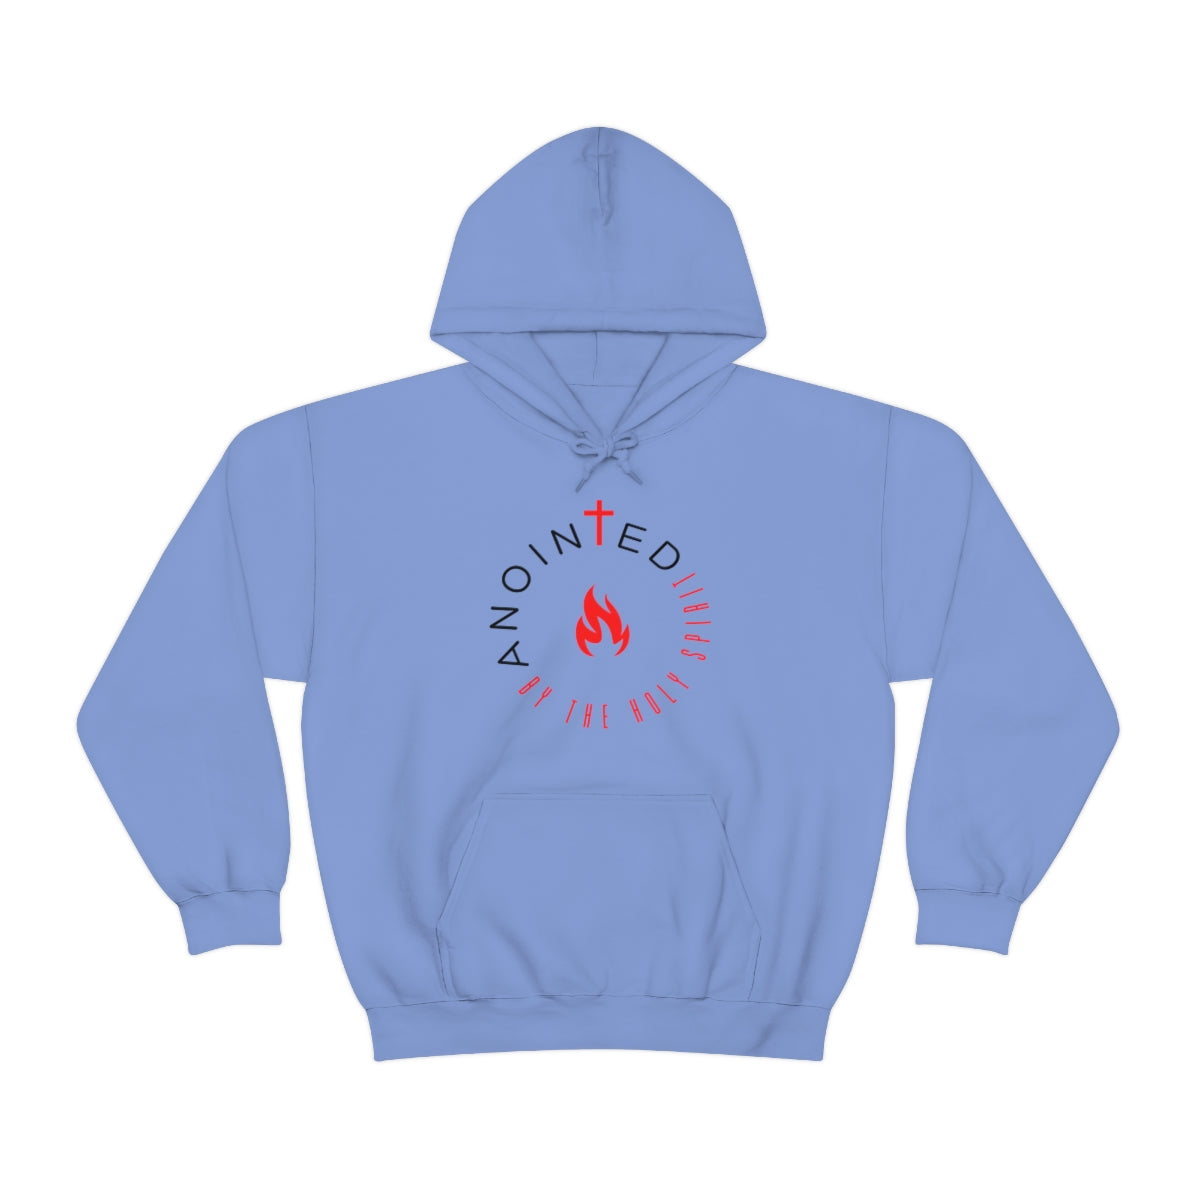 Anointed By The Holy Spirit Womens Hoodie